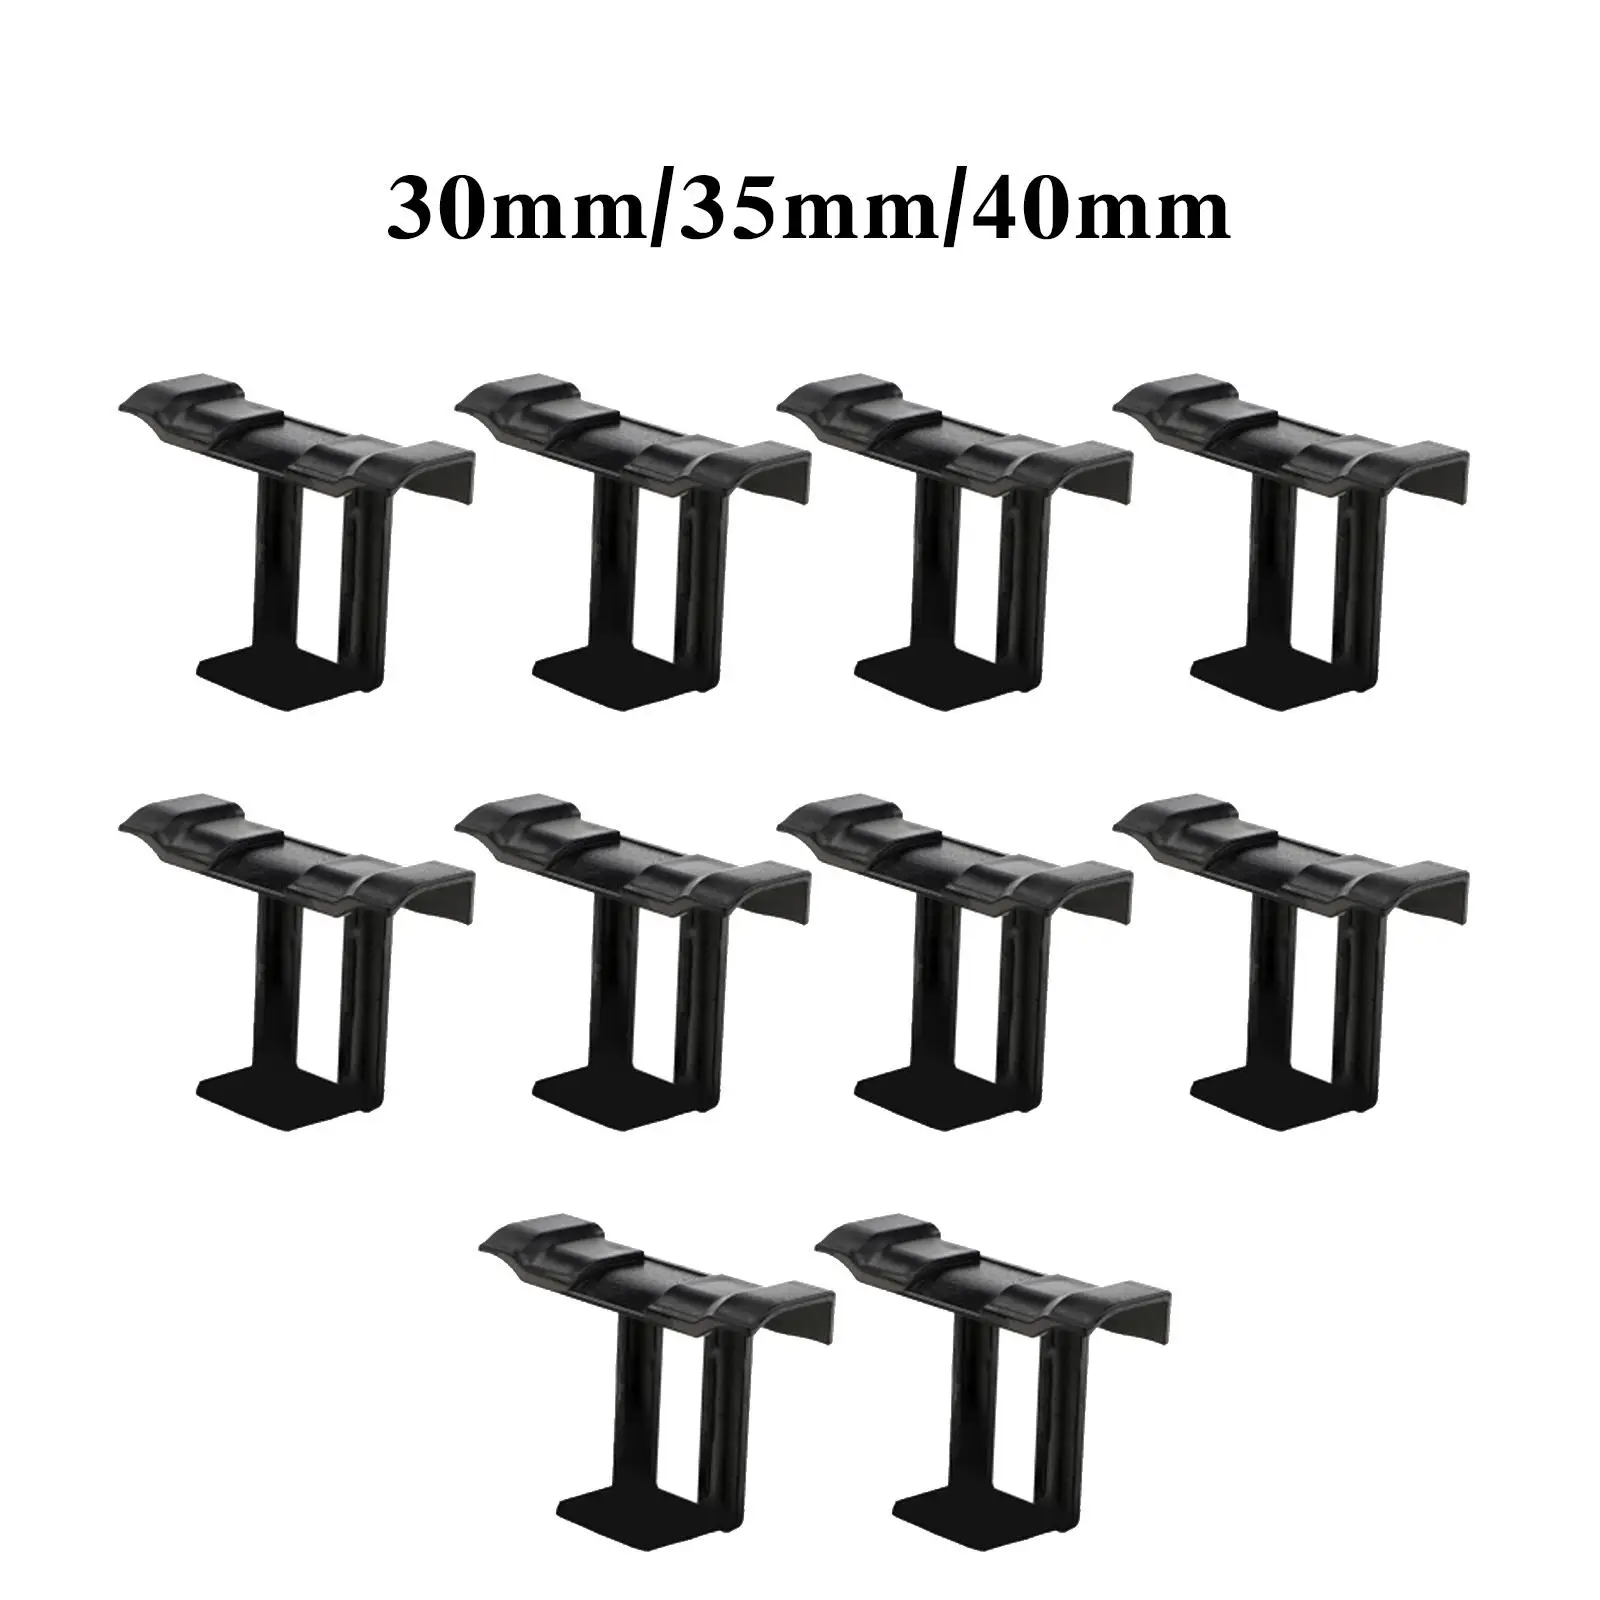 10 Pieces Water Drain Clips Auto Remove Stagnant Water Dust Pv Modules Cleaning Clips for Photovoltaic Panel Water Drain